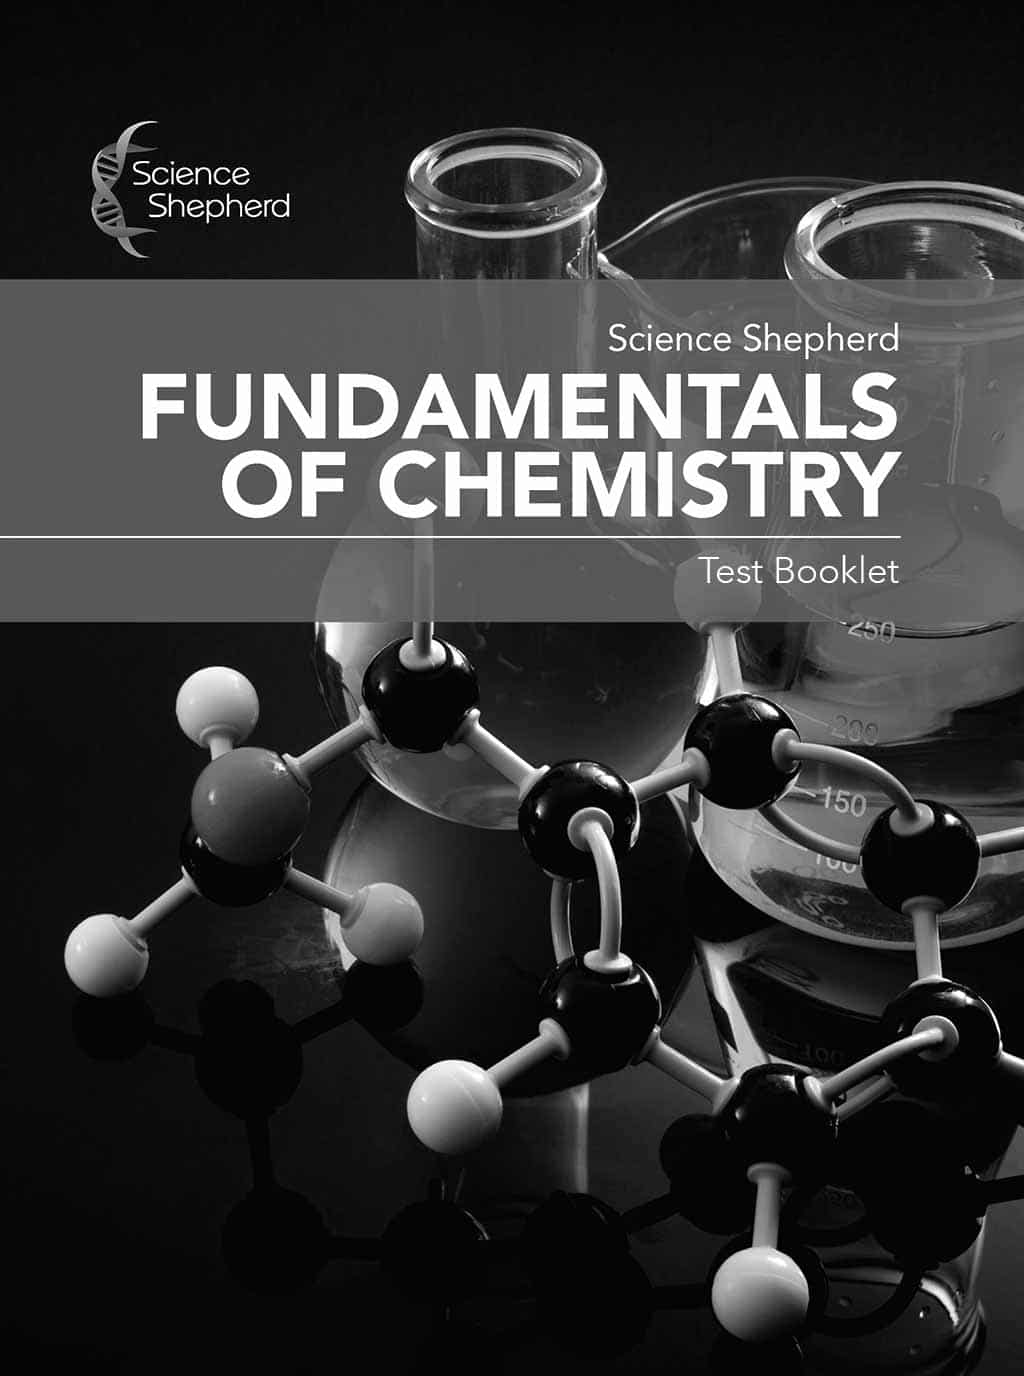 Homeschool chemistry tests booklet cover of molecular model and beakers in grayscale